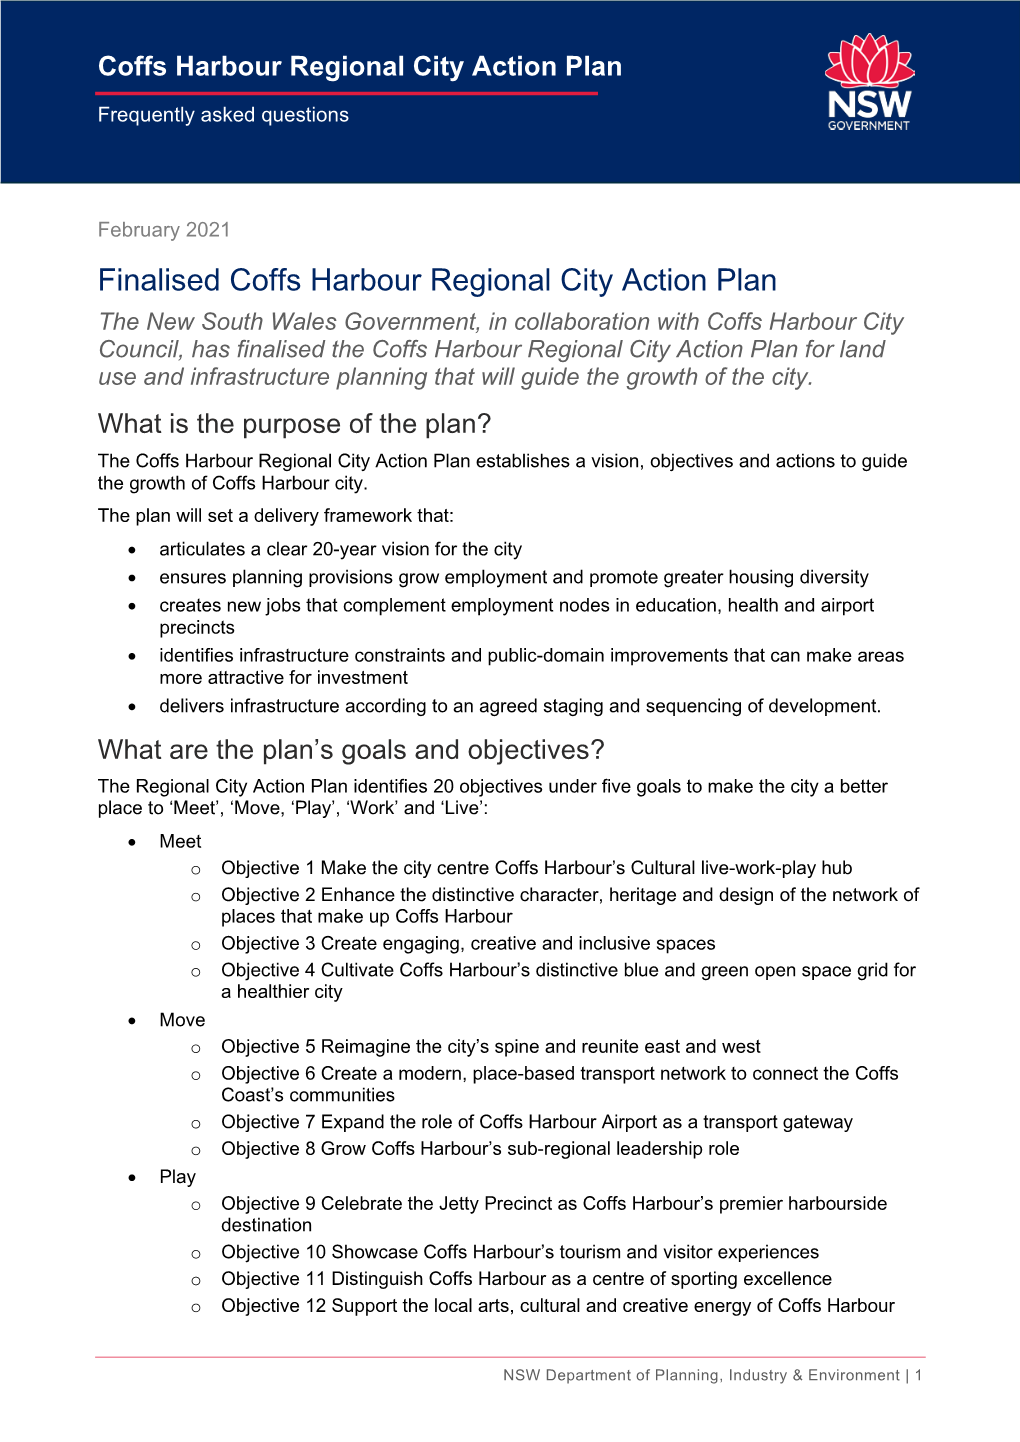 Coffs Harbour Regional City Action Plan—Frequently Asked Questions